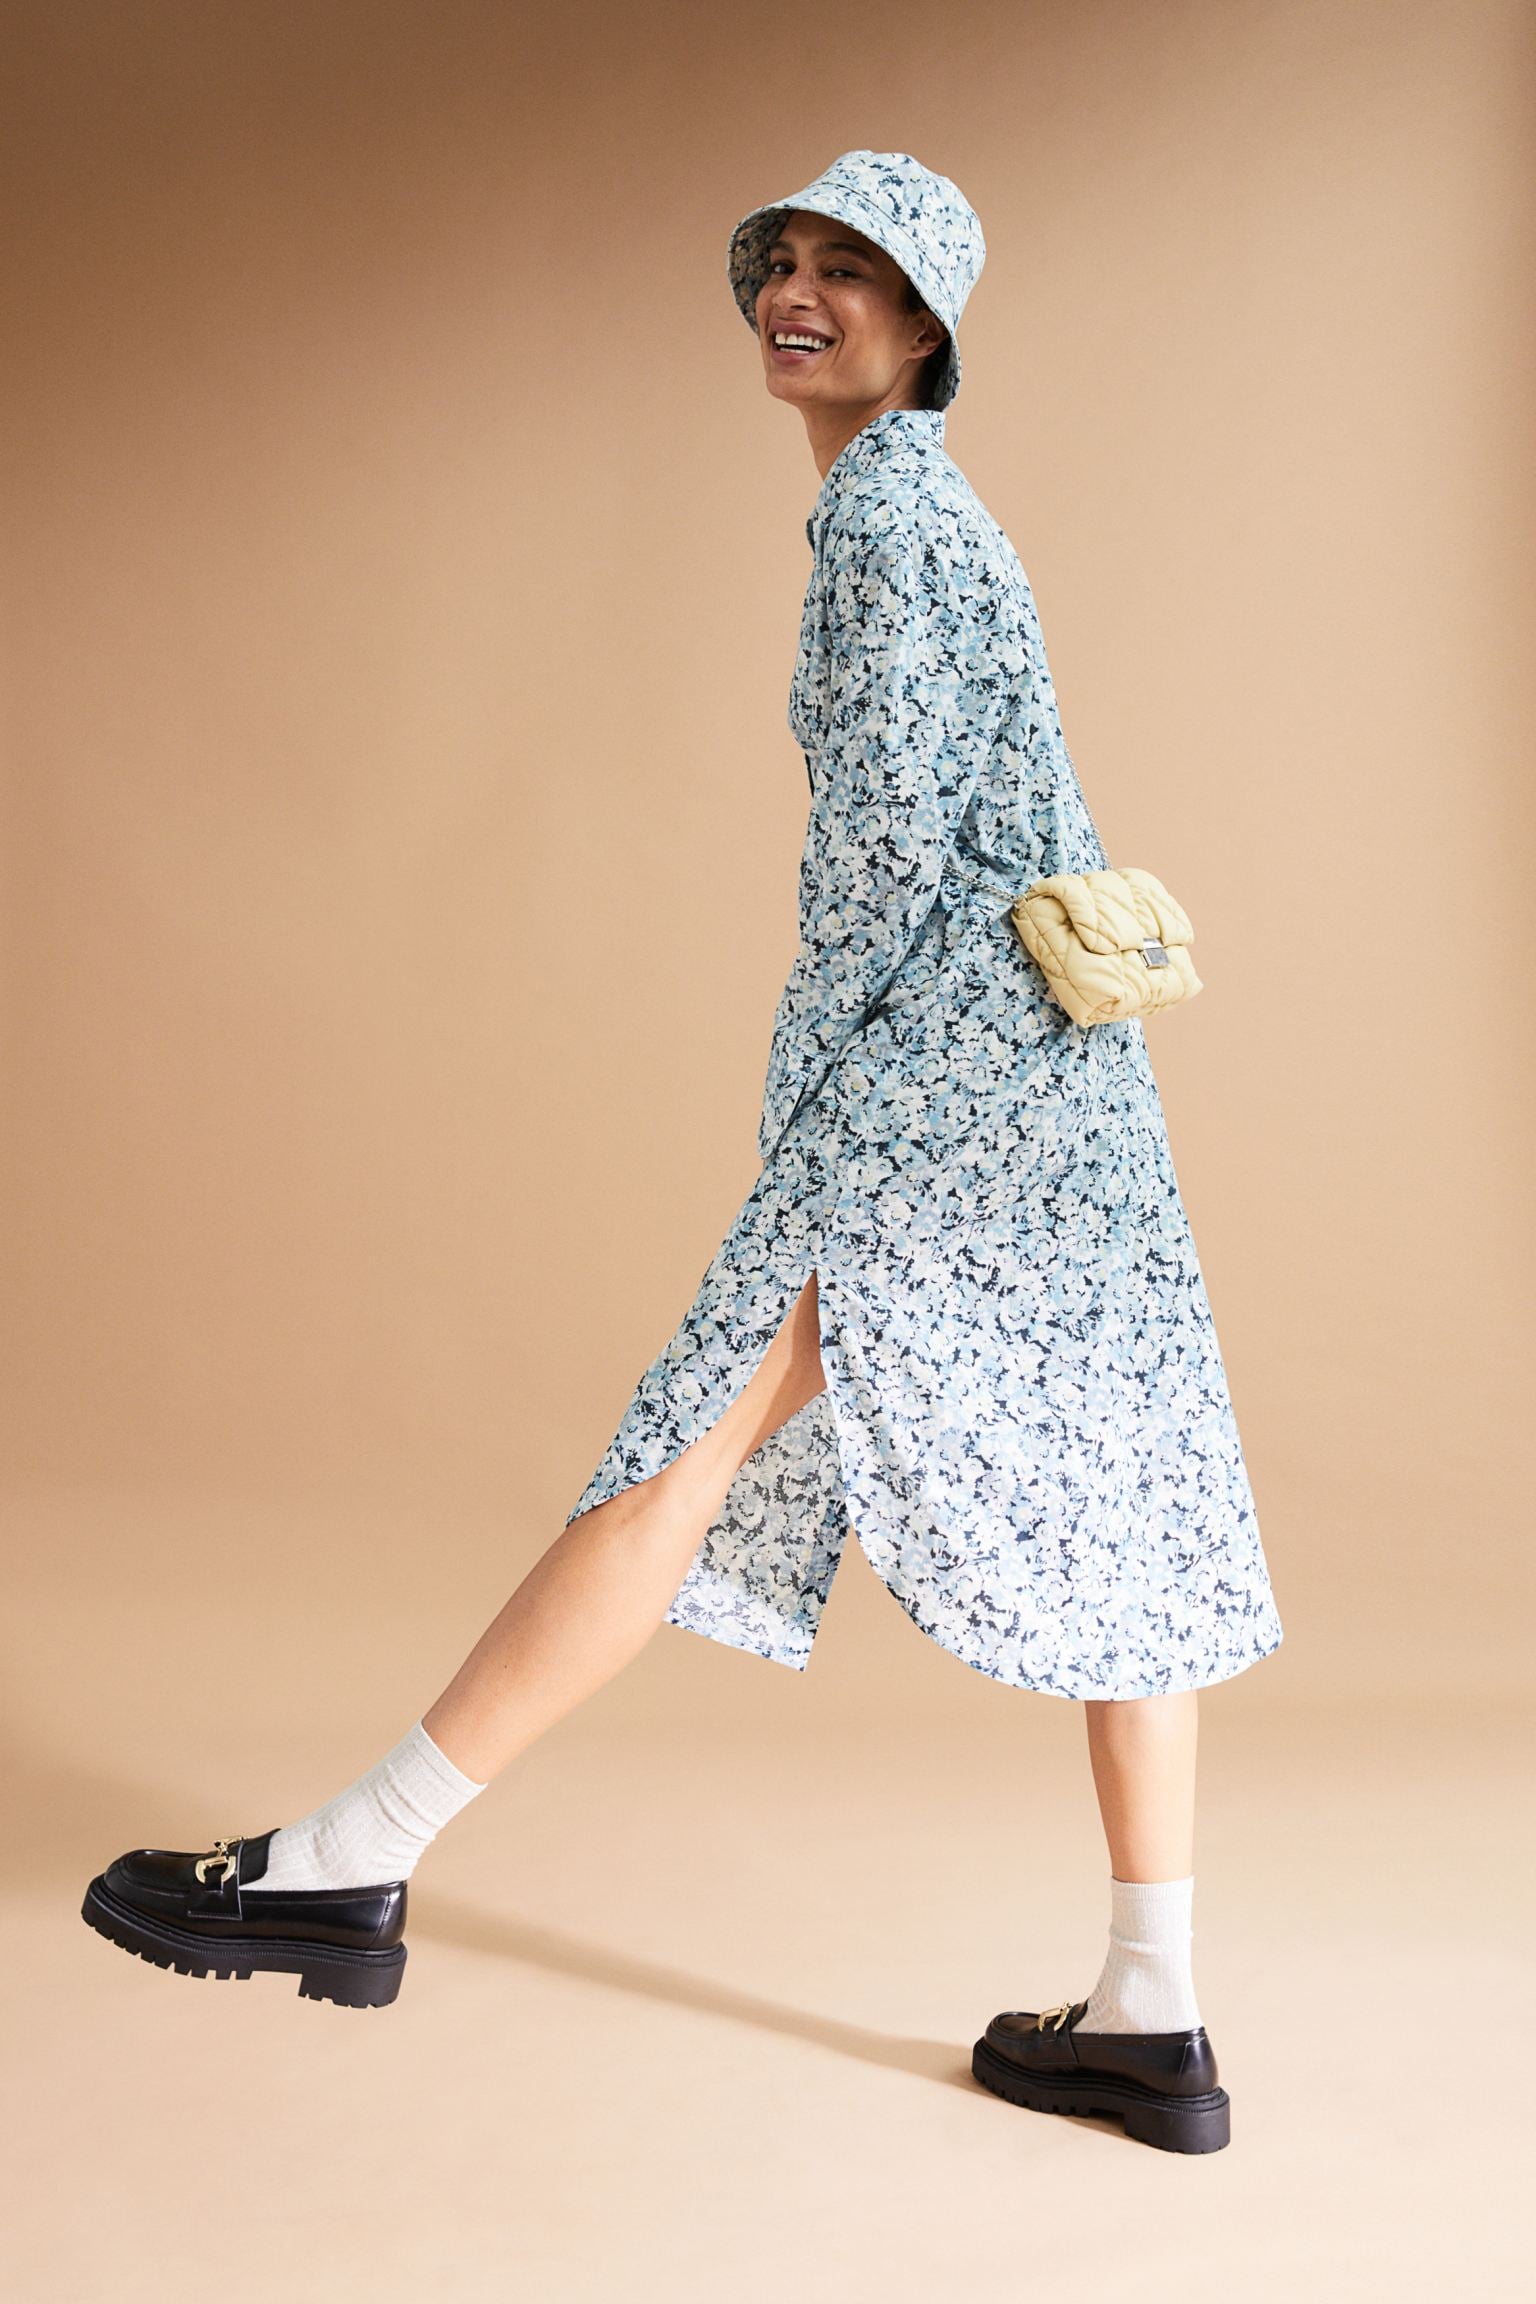 dye A faithful seed A Long Floral Dress: H&M Shirt Dress | These 15 Modest Dresses Are the  Perfect Styles For No-Pants Season | POPSUGAR Fashion Photo 2